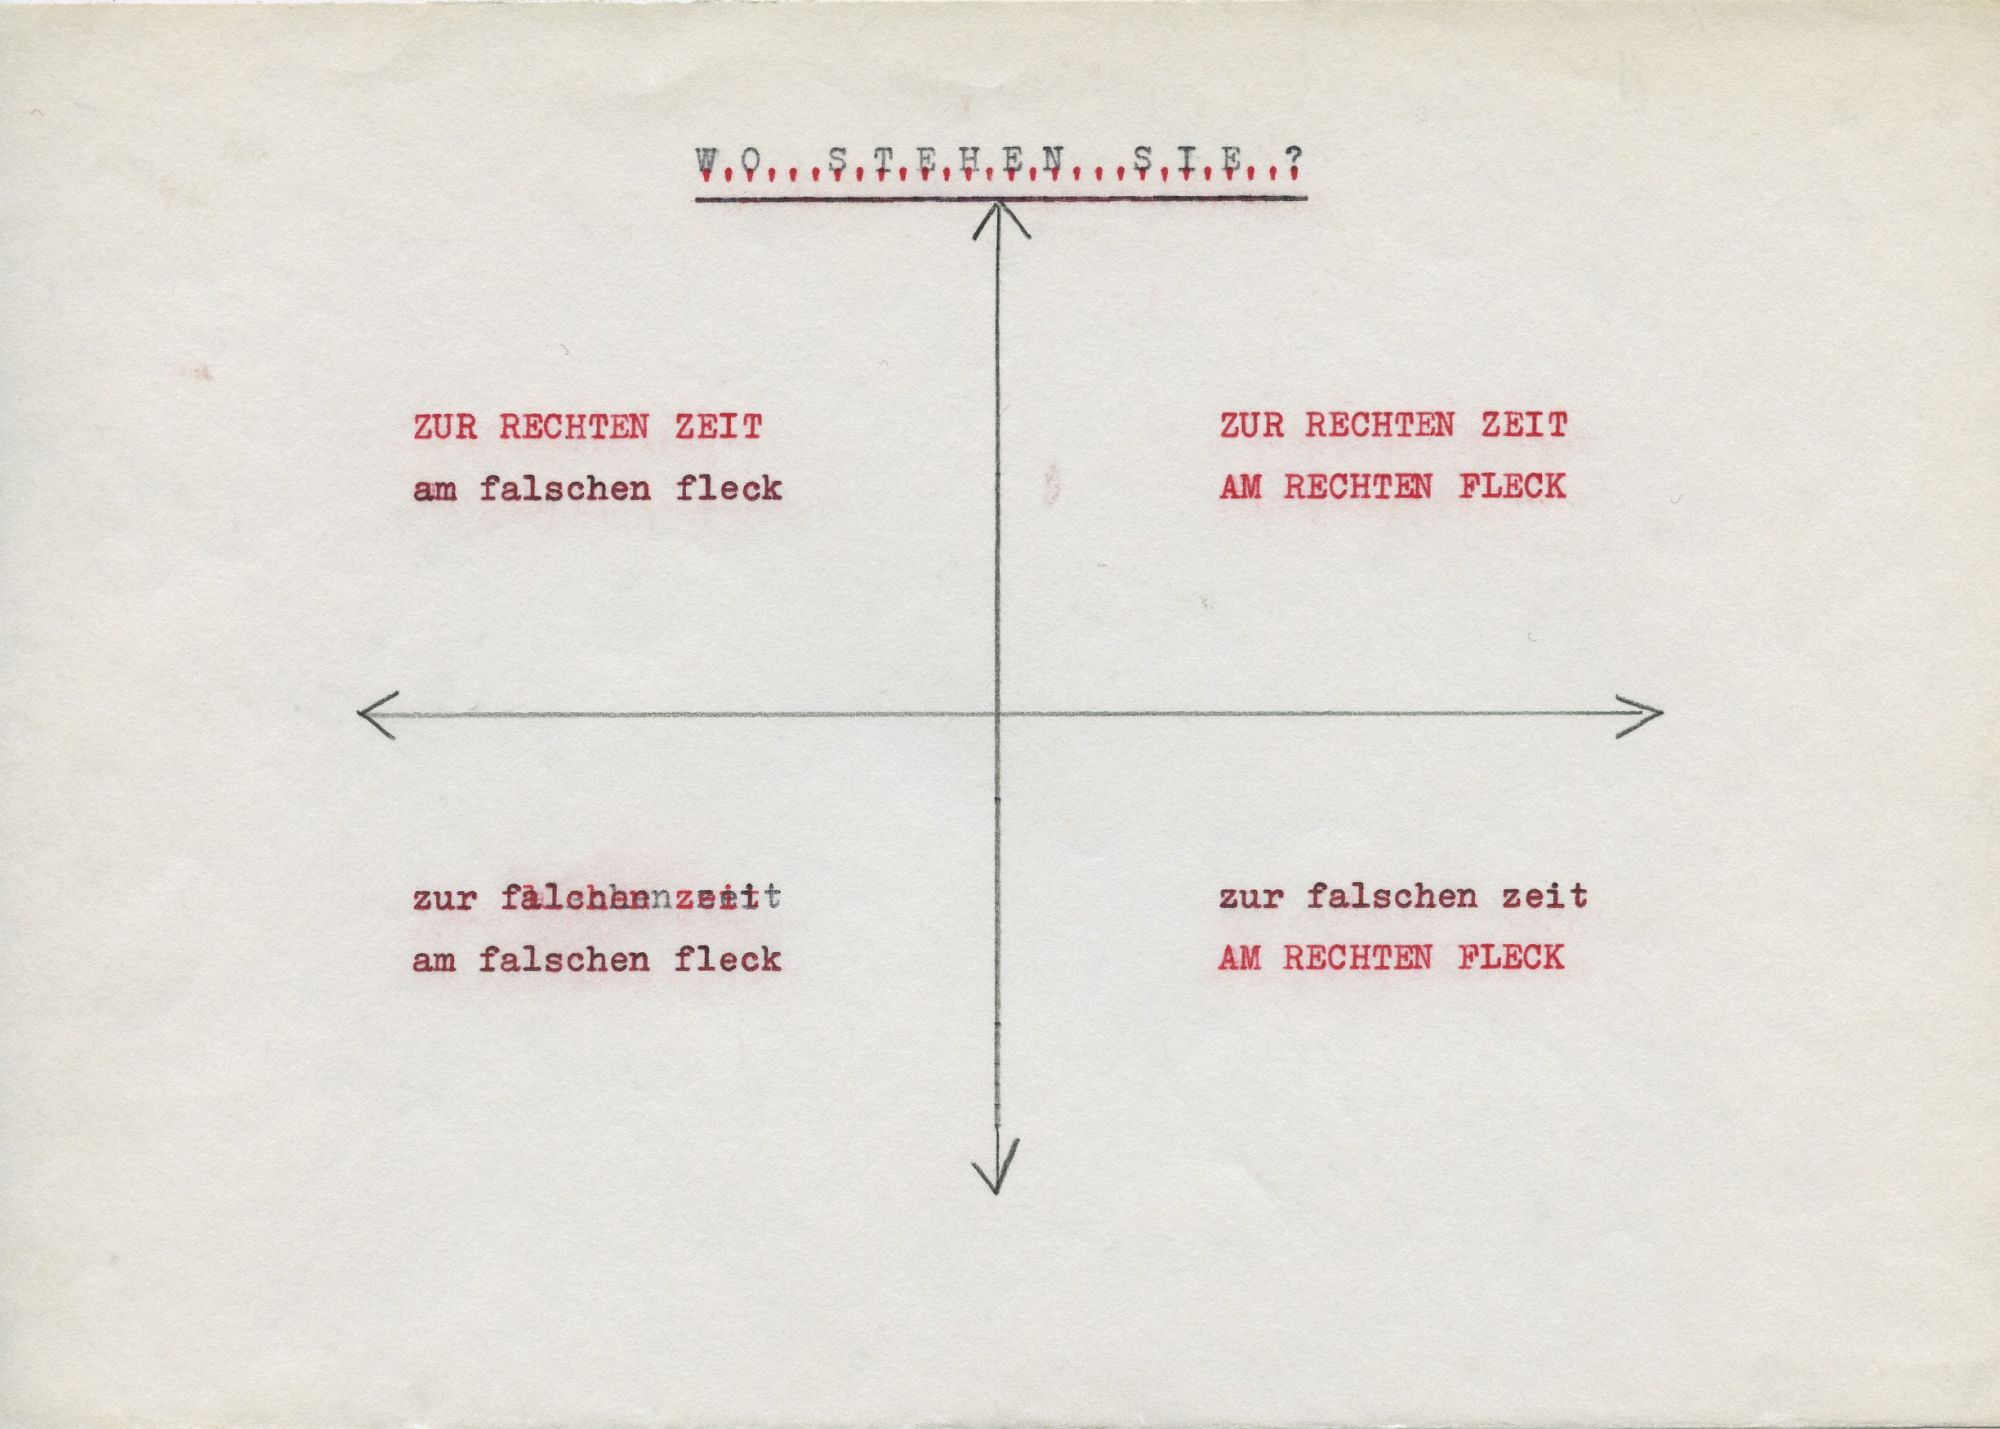 Ruth Wolf-Rehfeldt, "Wo stehen Sie?", late 1970s, Original typewriting, 15 × 21 cm, Courtesy of the Artist and Private Collection.